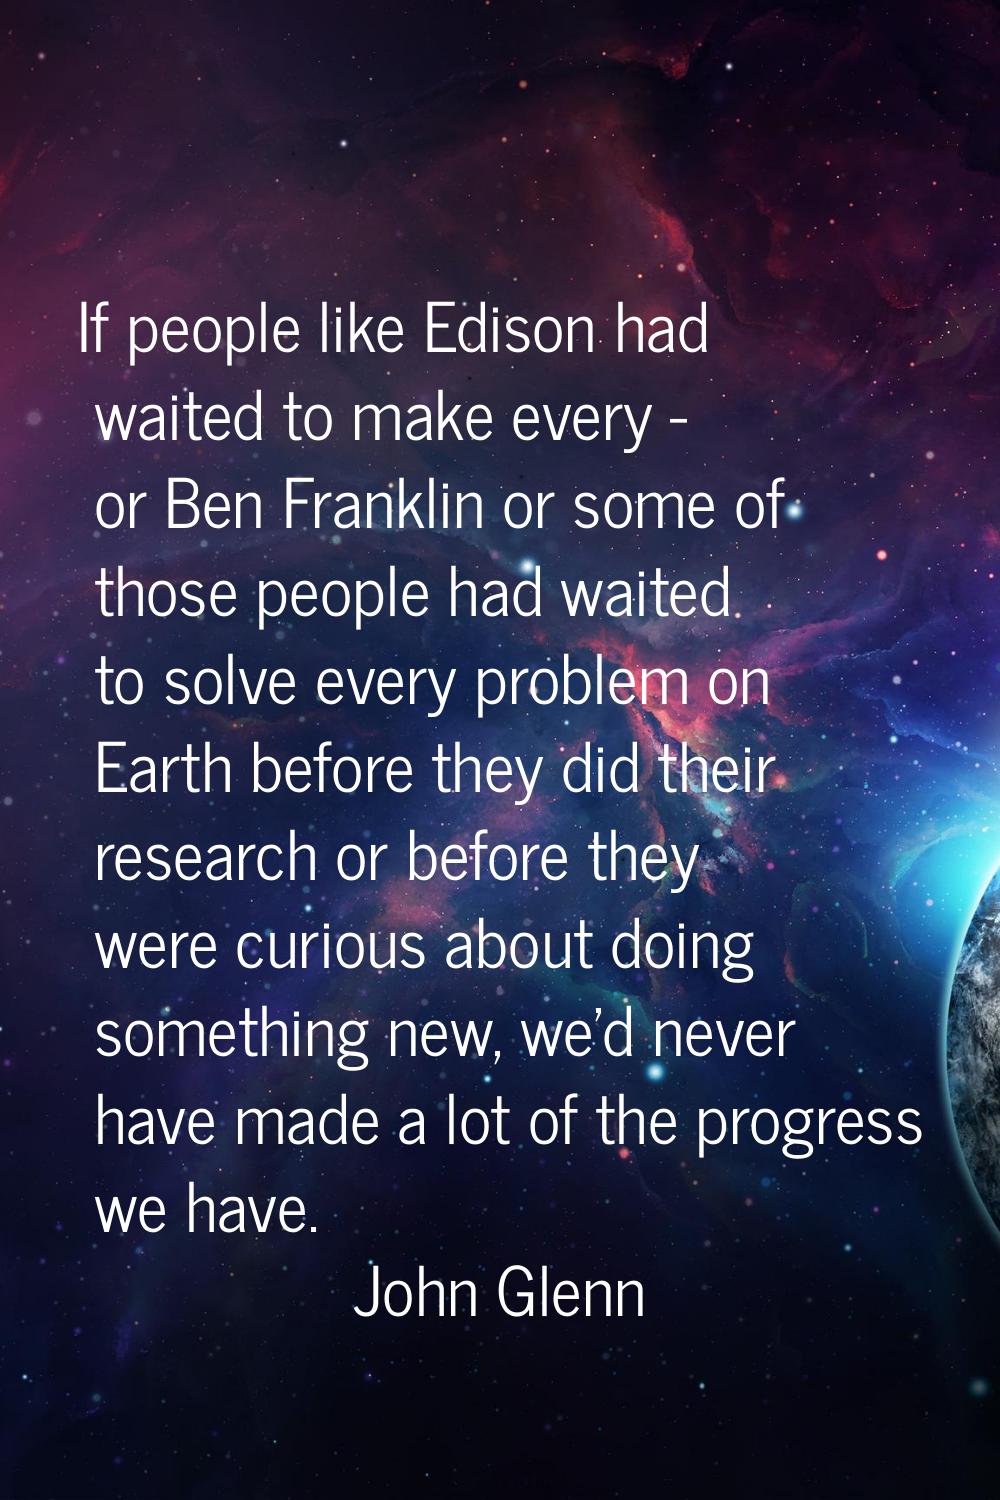 If people like Edison had waited to make every - or Ben Franklin or some of those people had waited